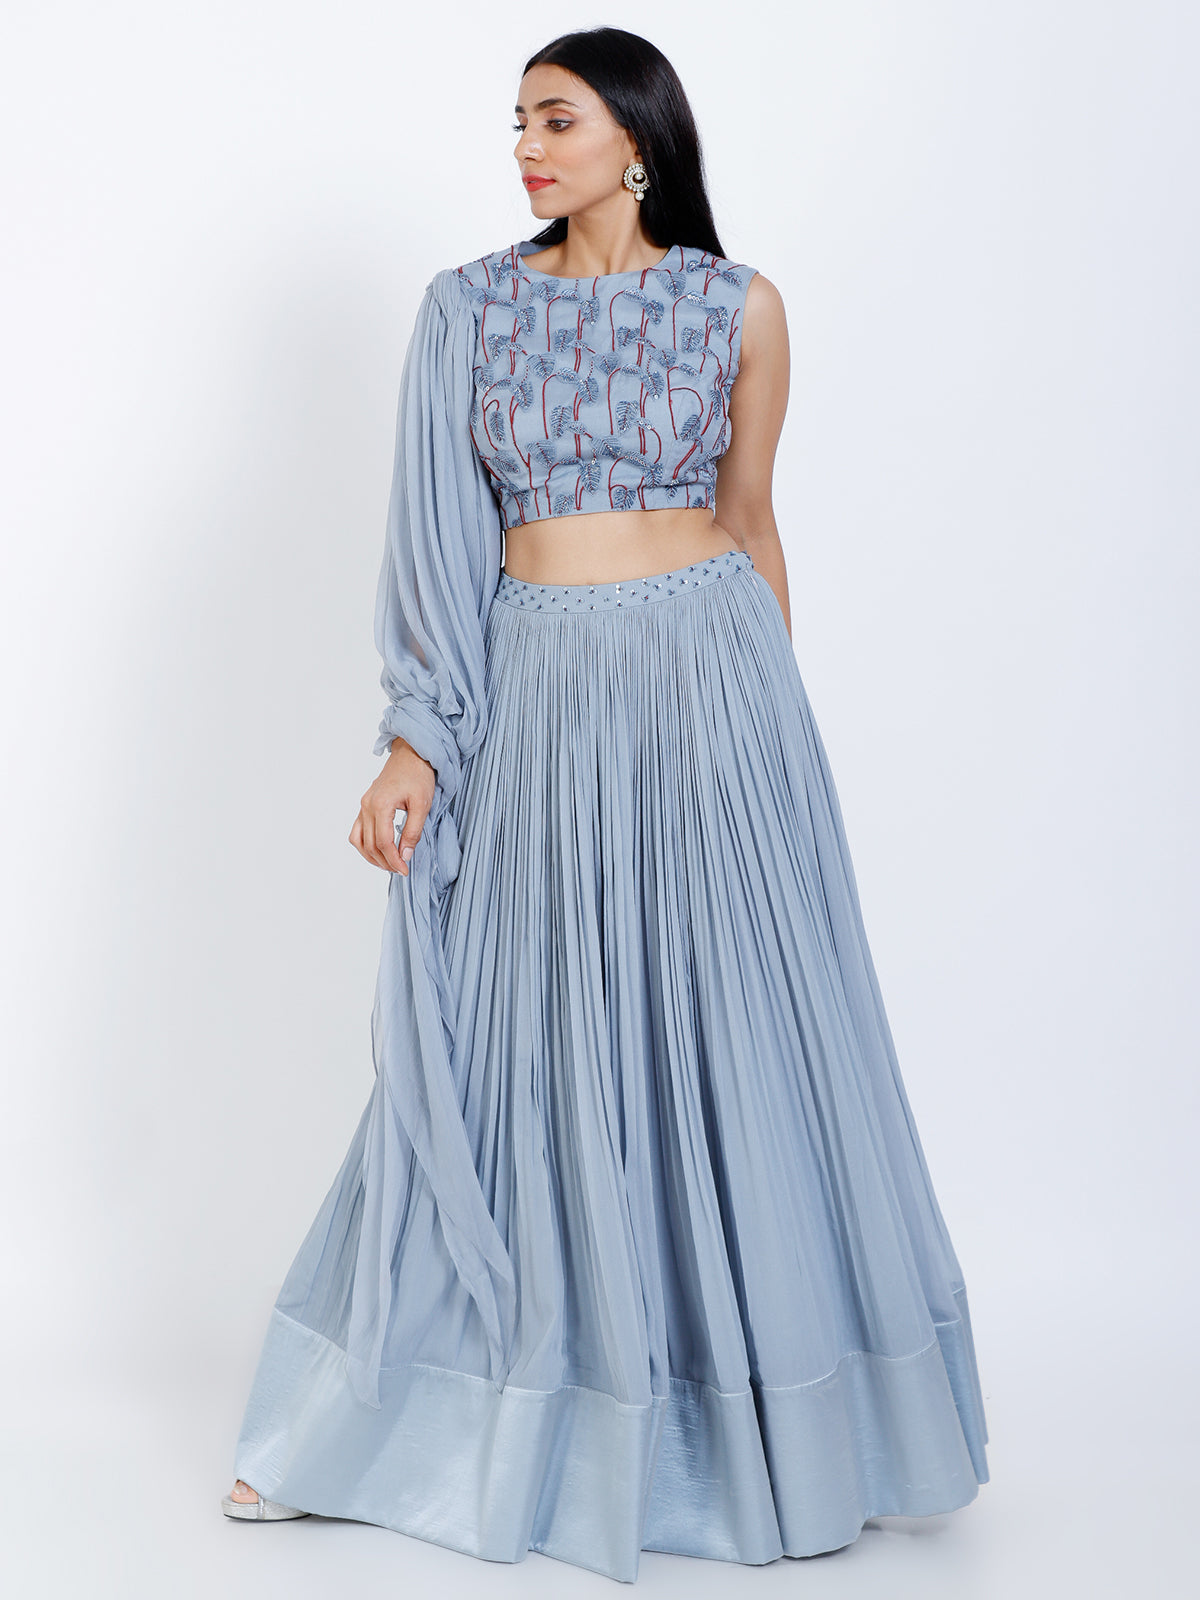 Embroidered crop top with separate skirt